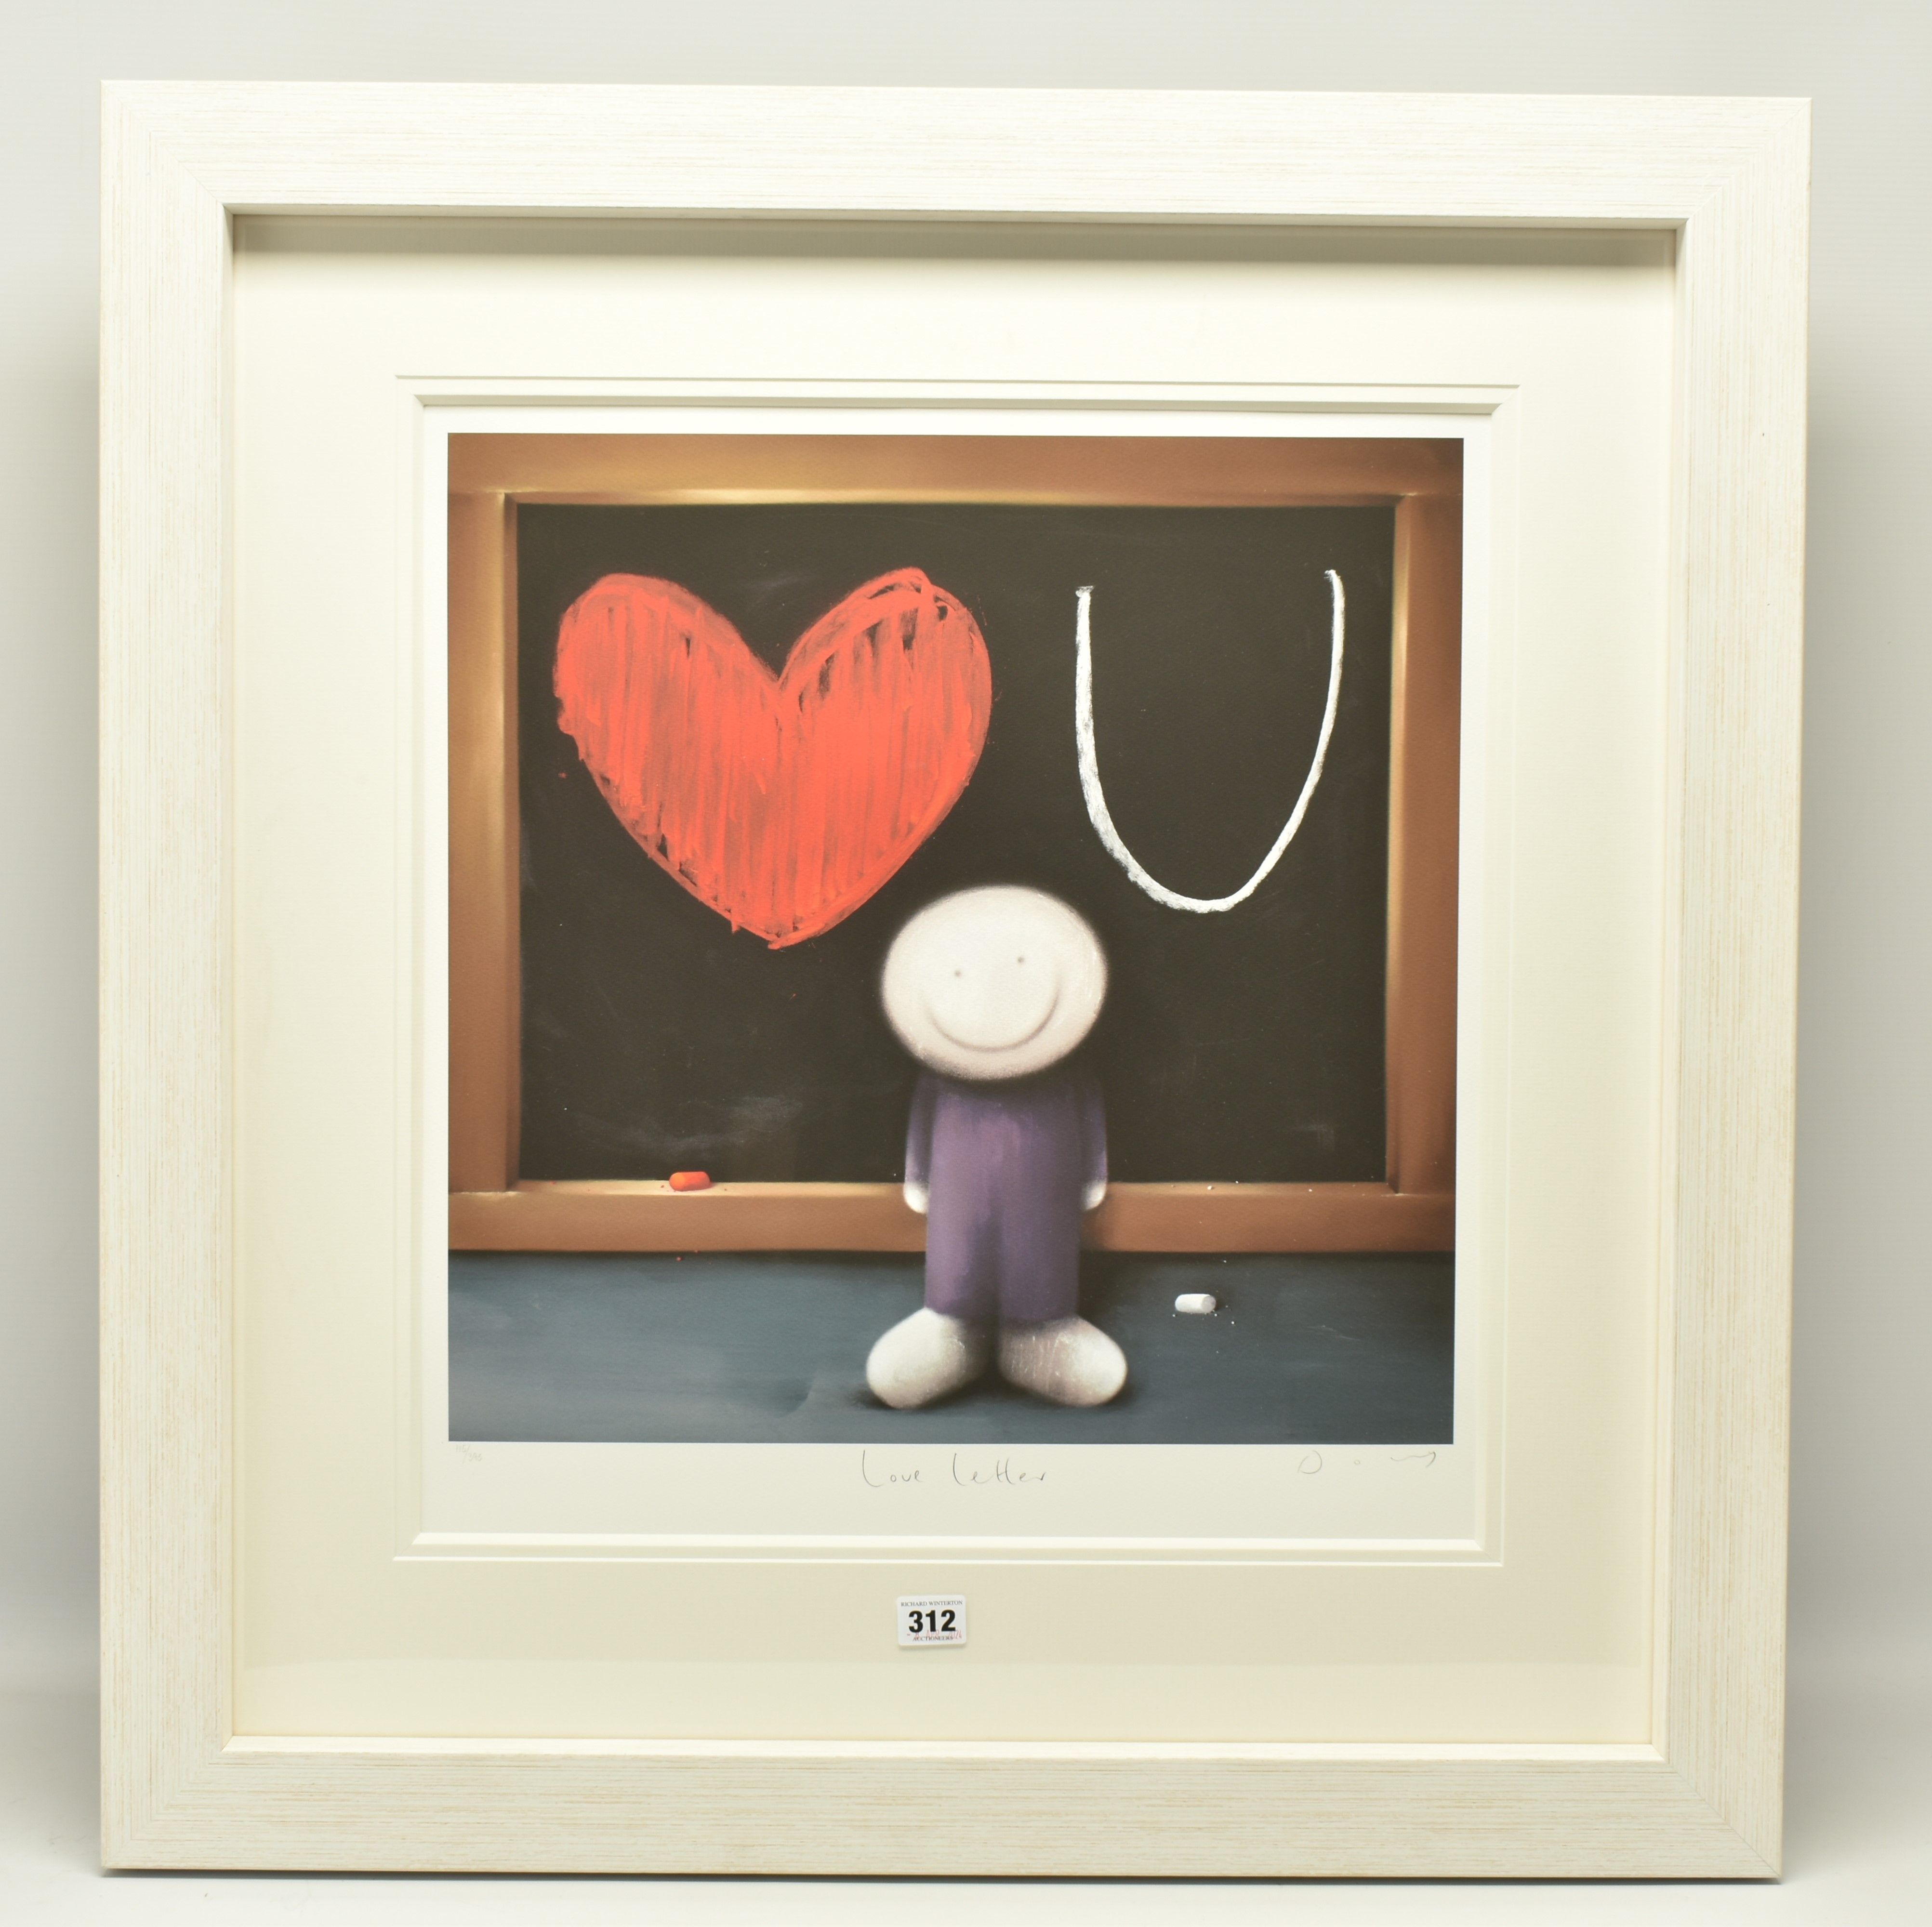 DOUG HYDE (BRITISH 1972) 'LOVE LETTER', a signed limited edition print on paper, depicting a smiling